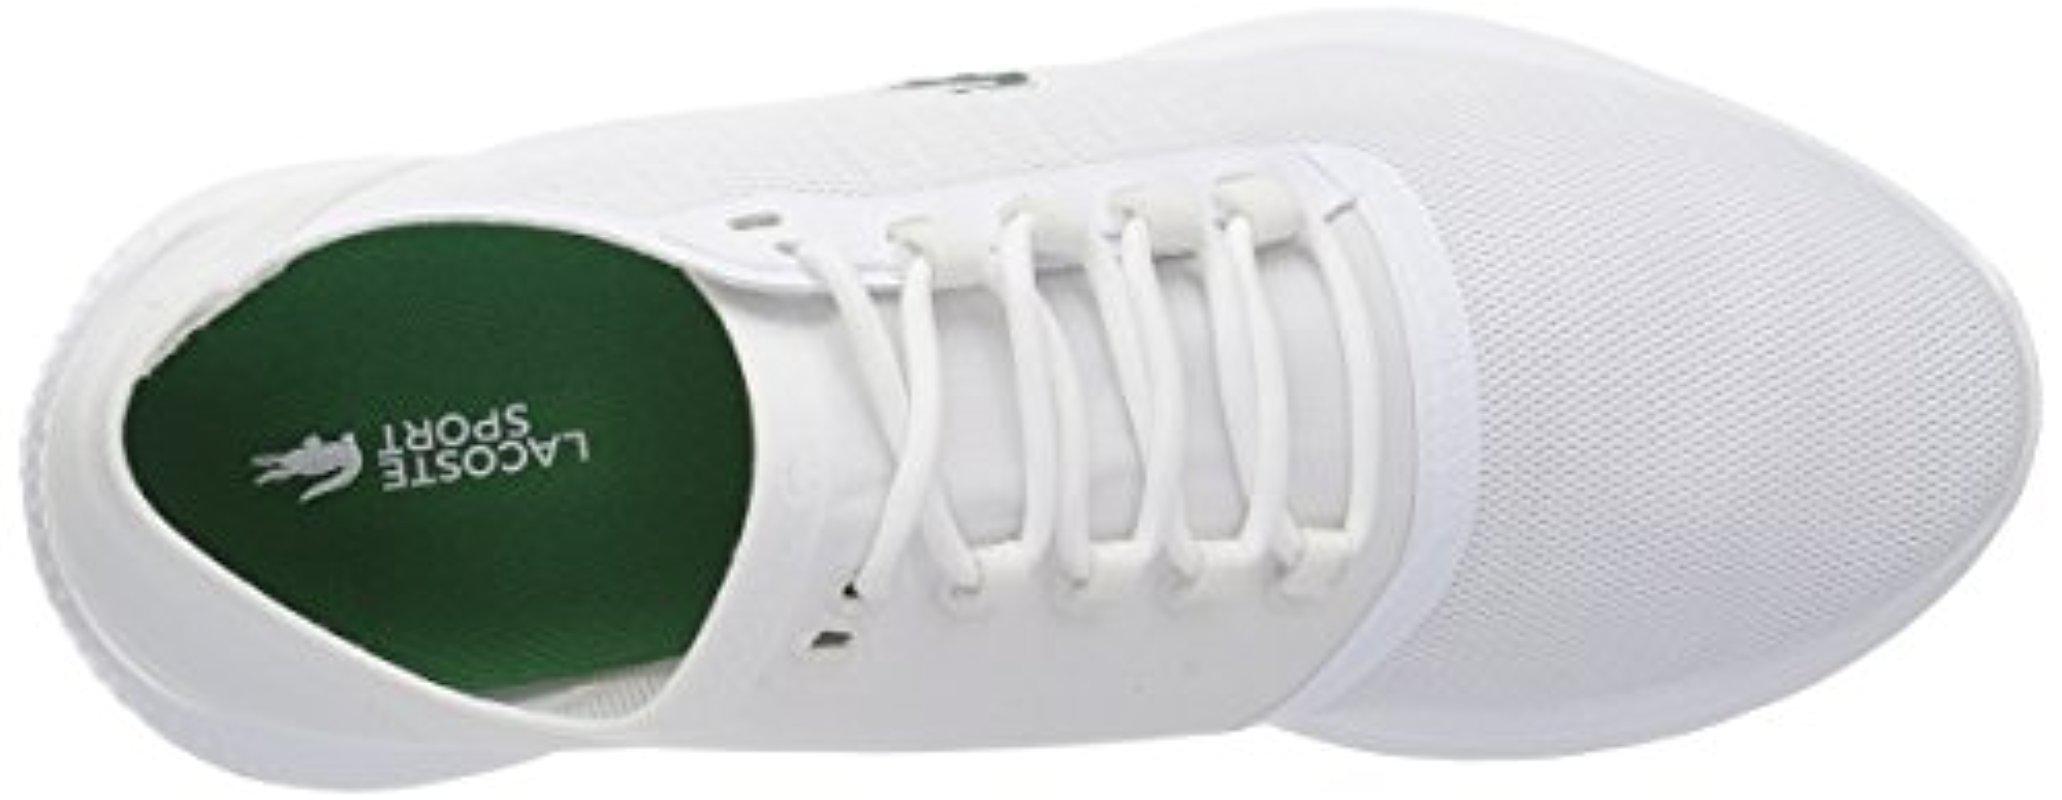 Lacoste Cotton Lt Fit 118 Spw Sneaker in White/White - Lyst